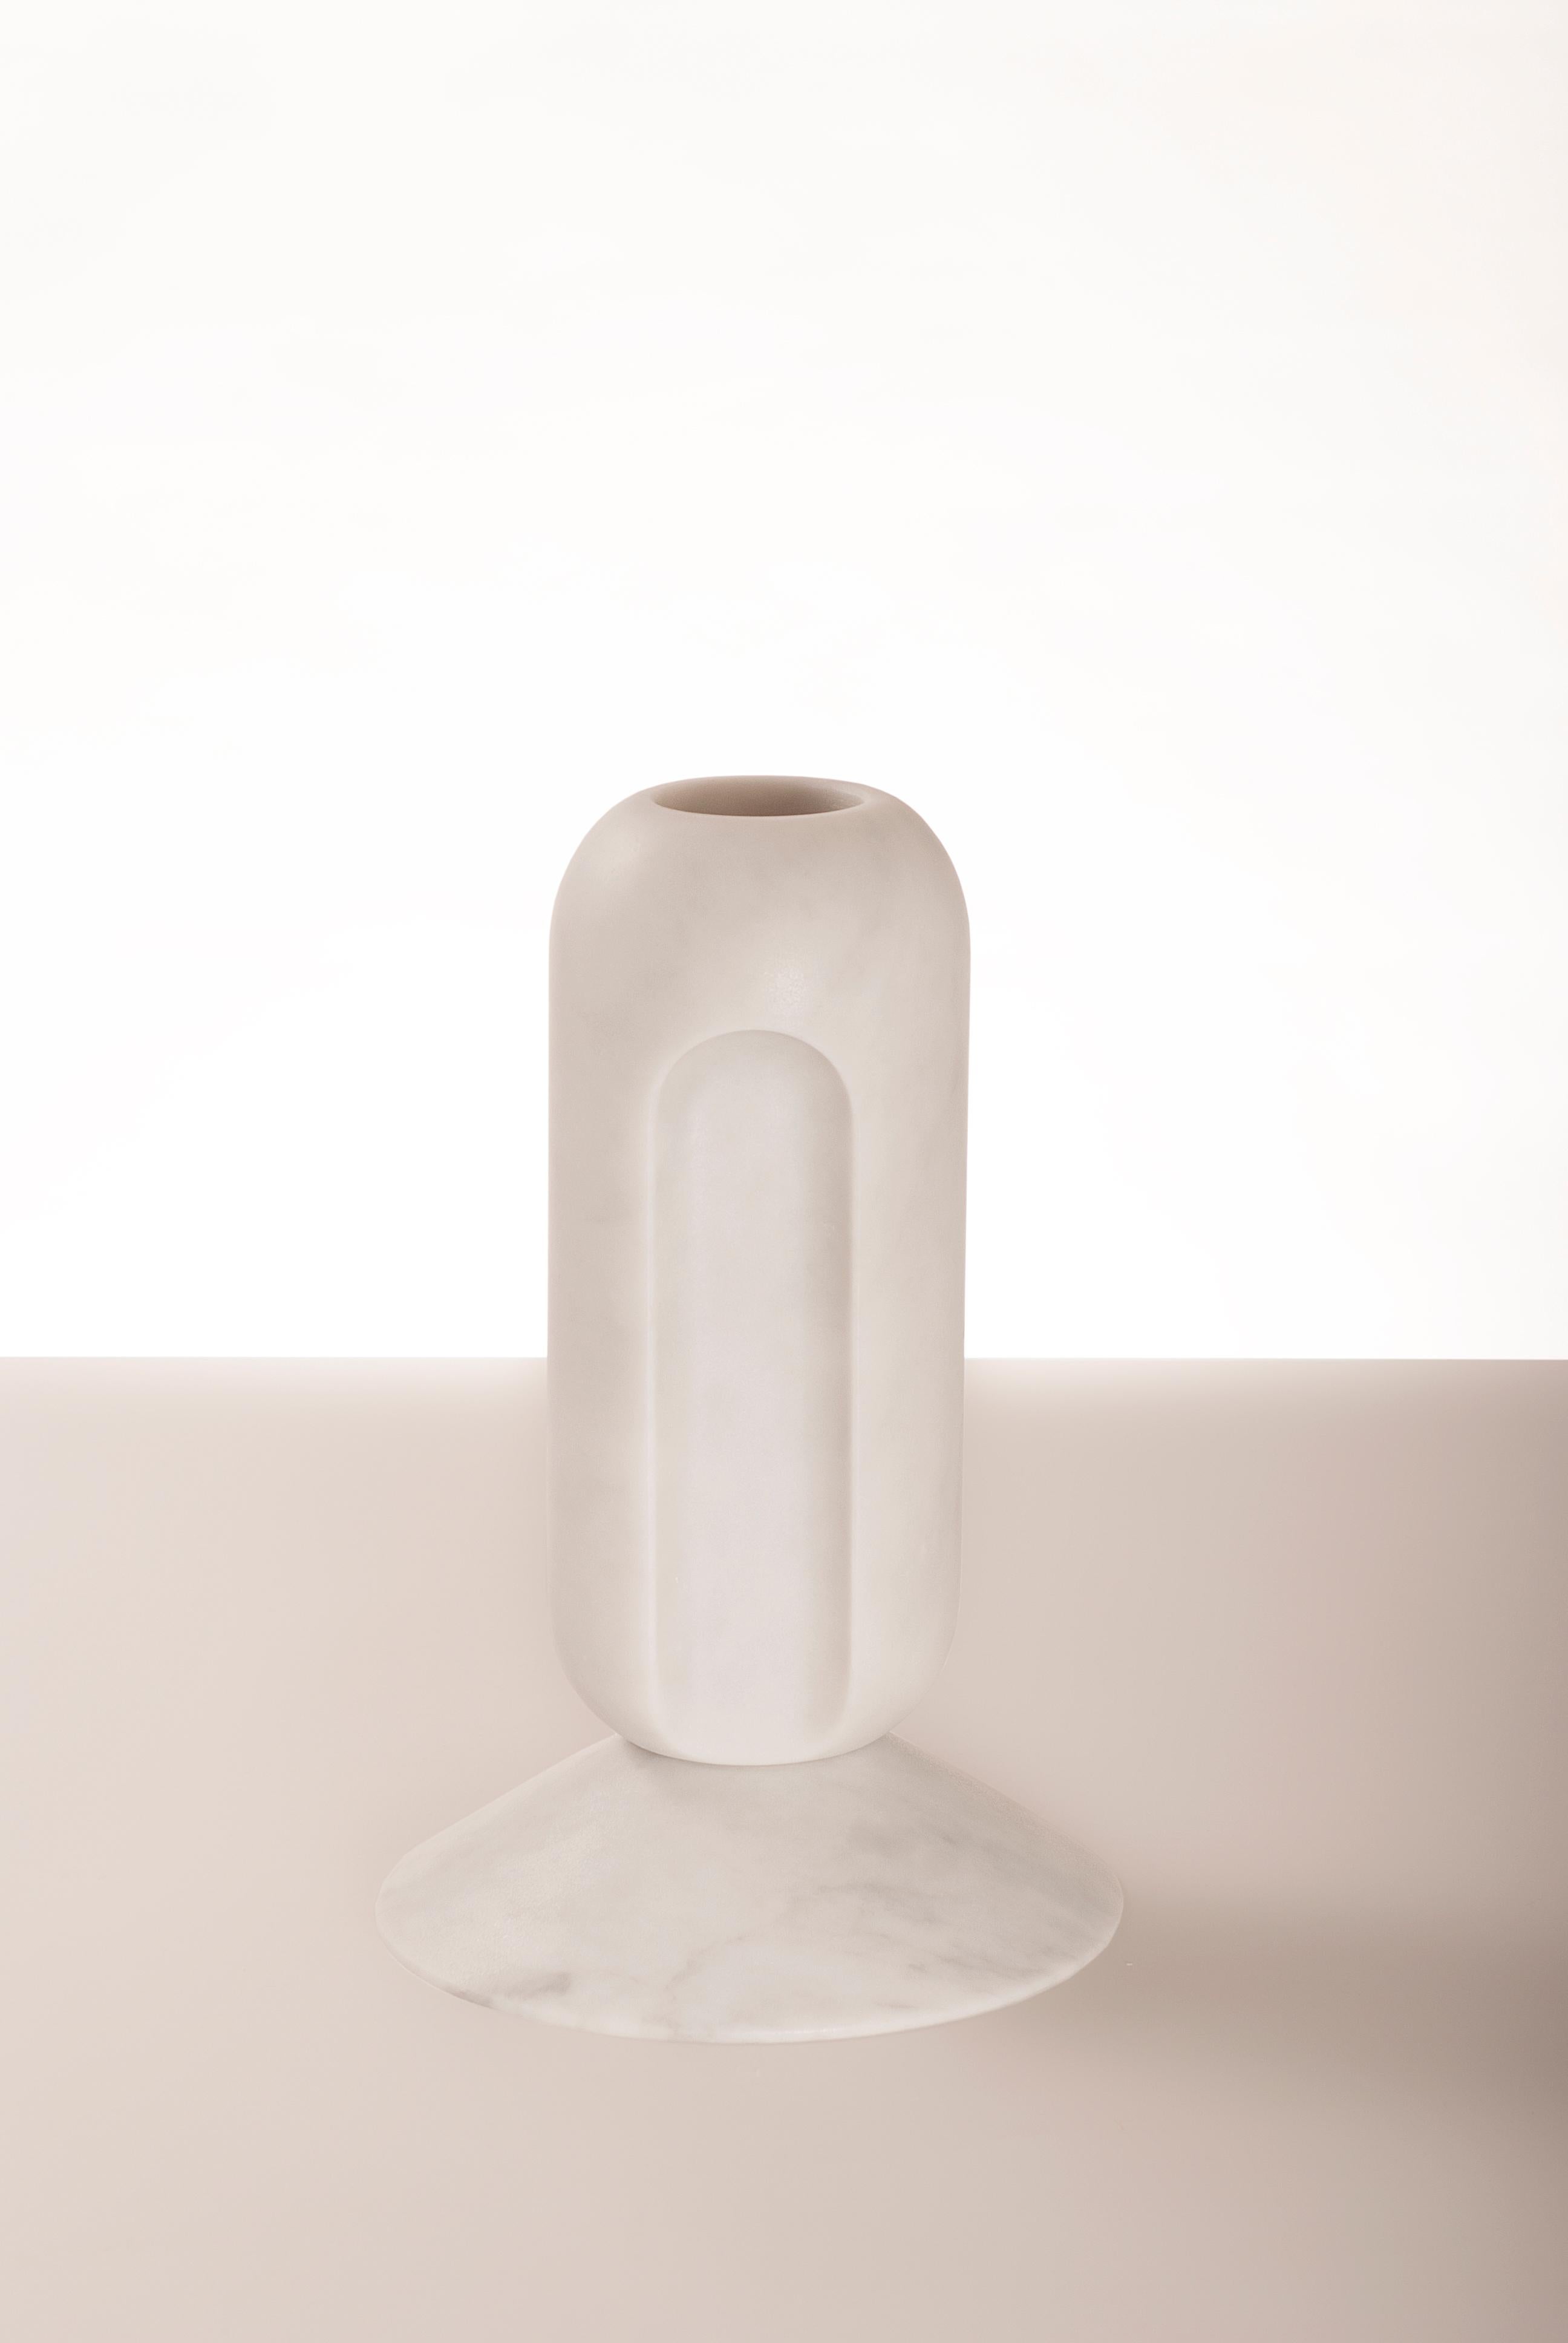 Cassus - marble contemporary vase - Valentina Cameranesi
Materials: White carrara marble (Also available in noir antique and green jade)
Dimensions: 36 x 24 x 24 cm

The “Avalon” series consists of 3 sculptural vases, made of White Arabescato